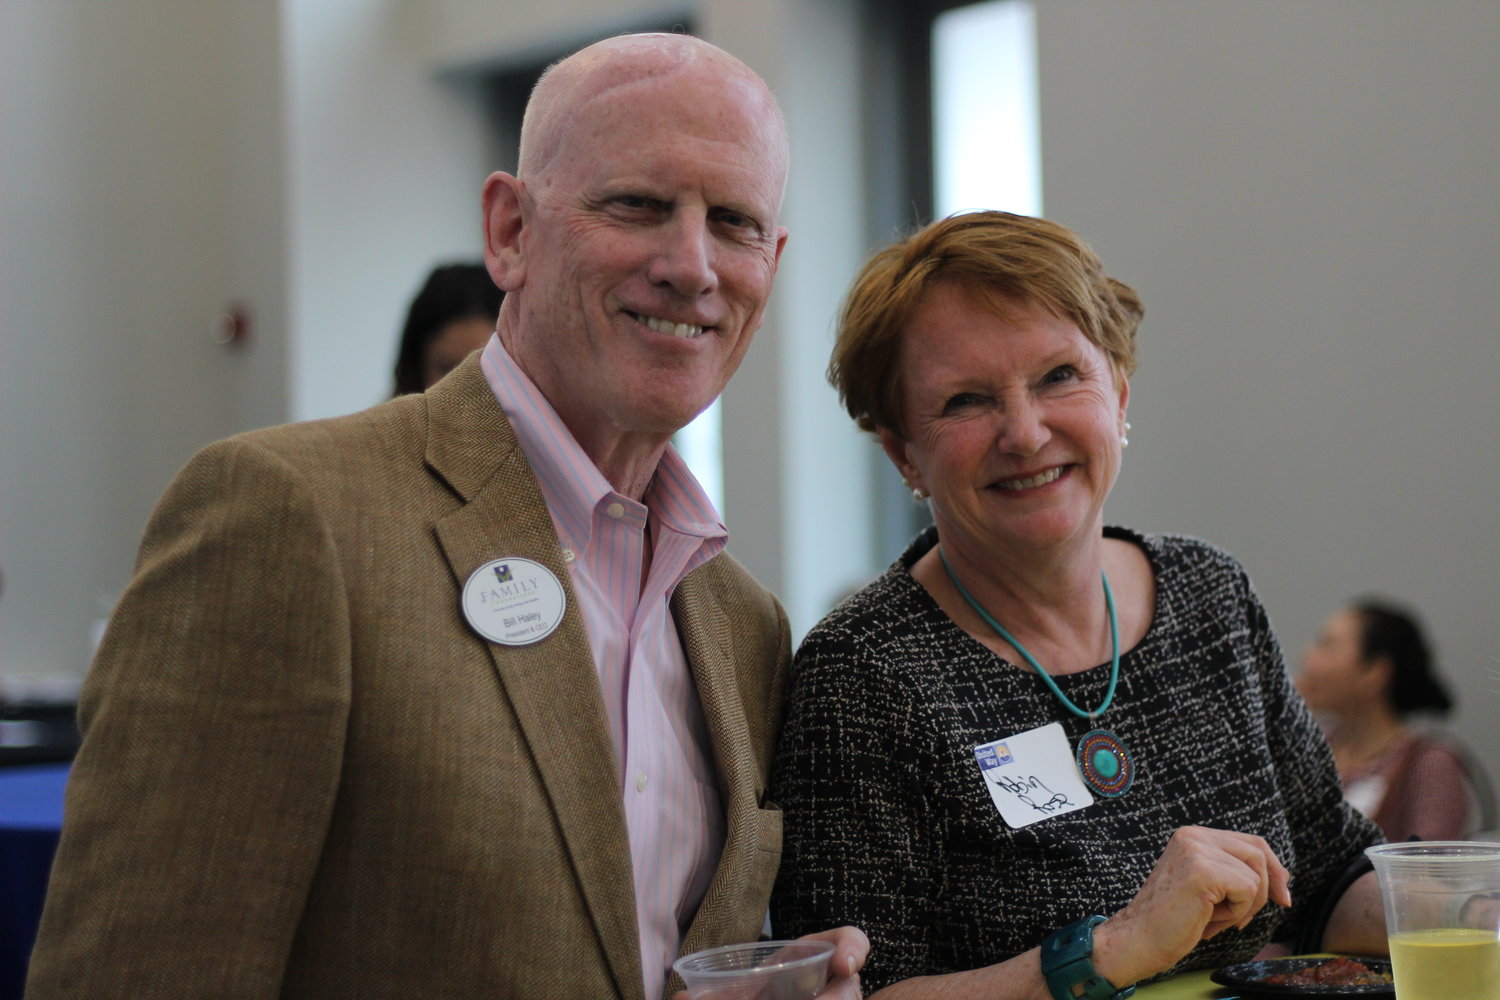 Bill Haley, Family Foundations President and CEO and Robin Rose, Girls Inc. CEO enjoy an evening of celebration at United Way of Northeast Florida’s annual Volunteer United event on June 5 at the Main Library Downtown.